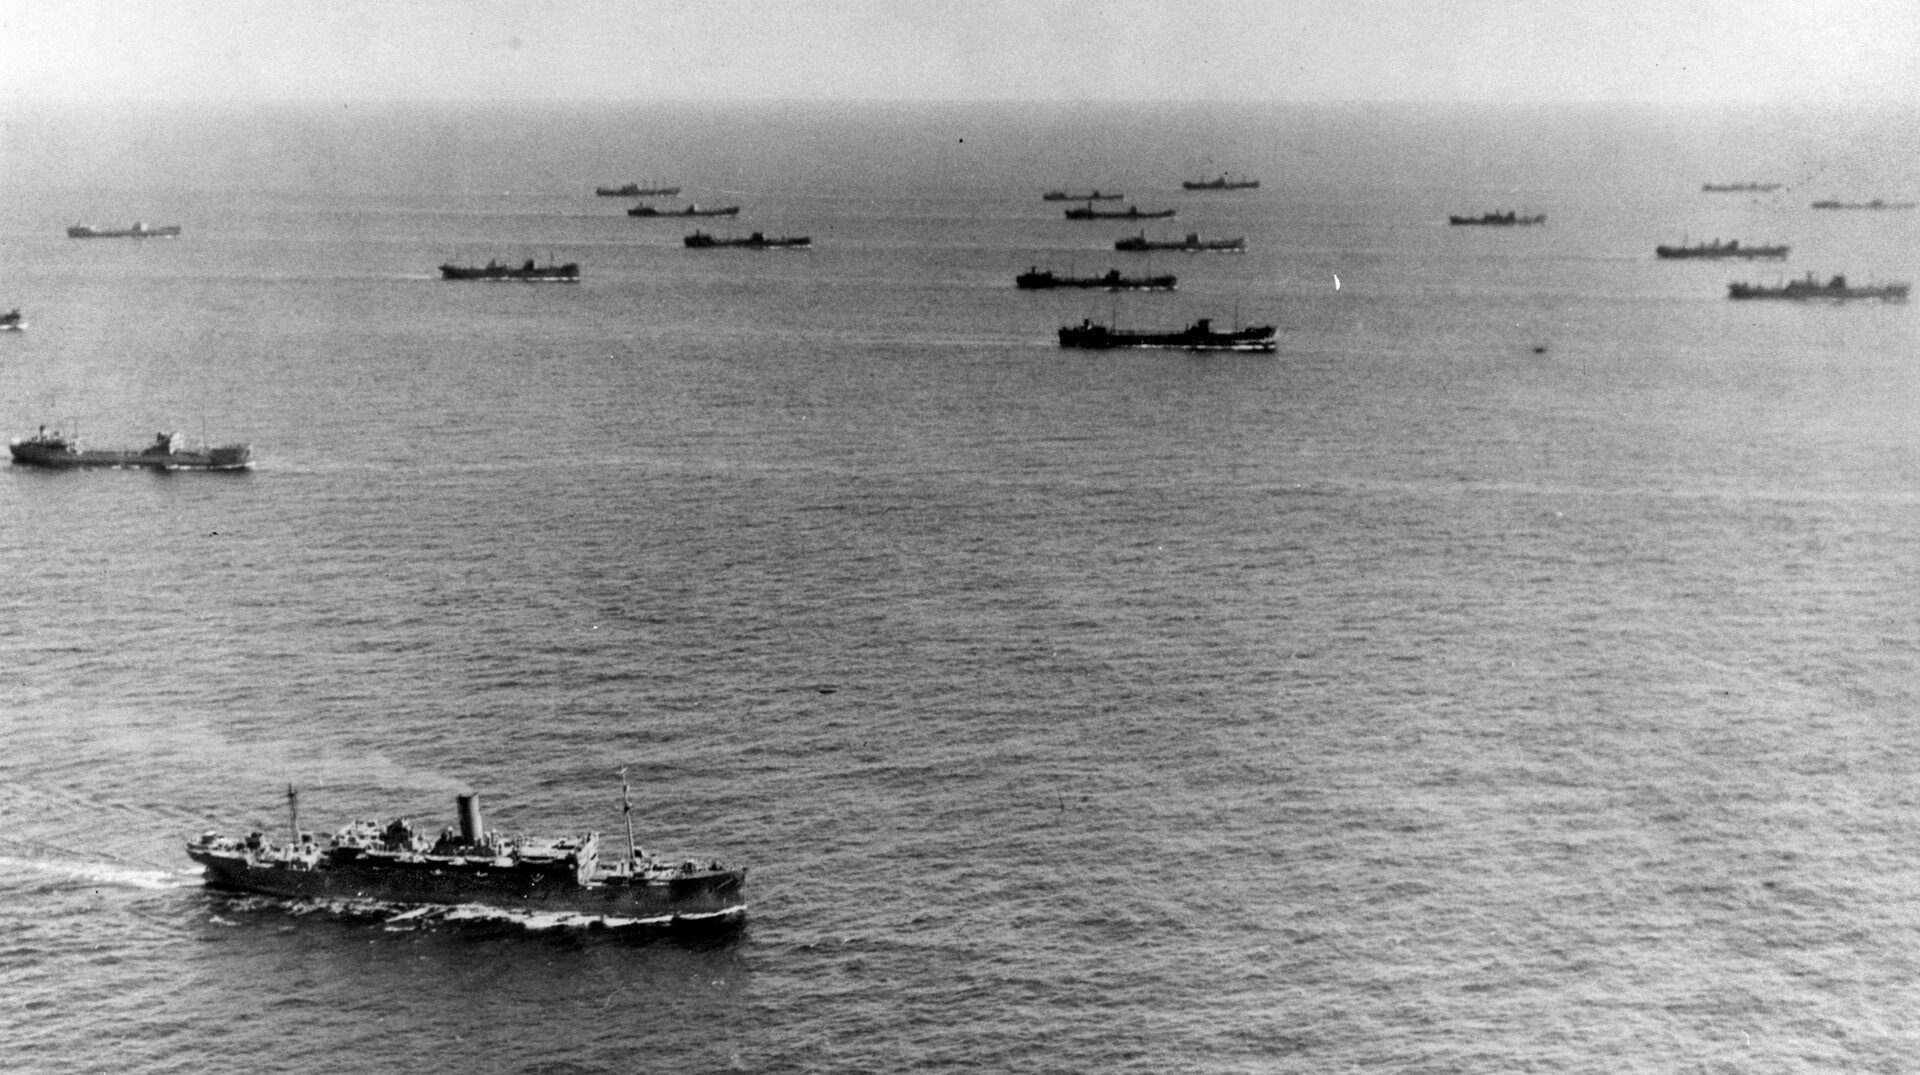 A large Allied convoy, the lifeline to the British Isles, stretches into the distance in preparation for the perilous passage across the Atlantic Ocean from North America to Britain. This photo was taken off the coast of Newfoundland, and encounters with marauding Nazi U-boats were expected along the way.